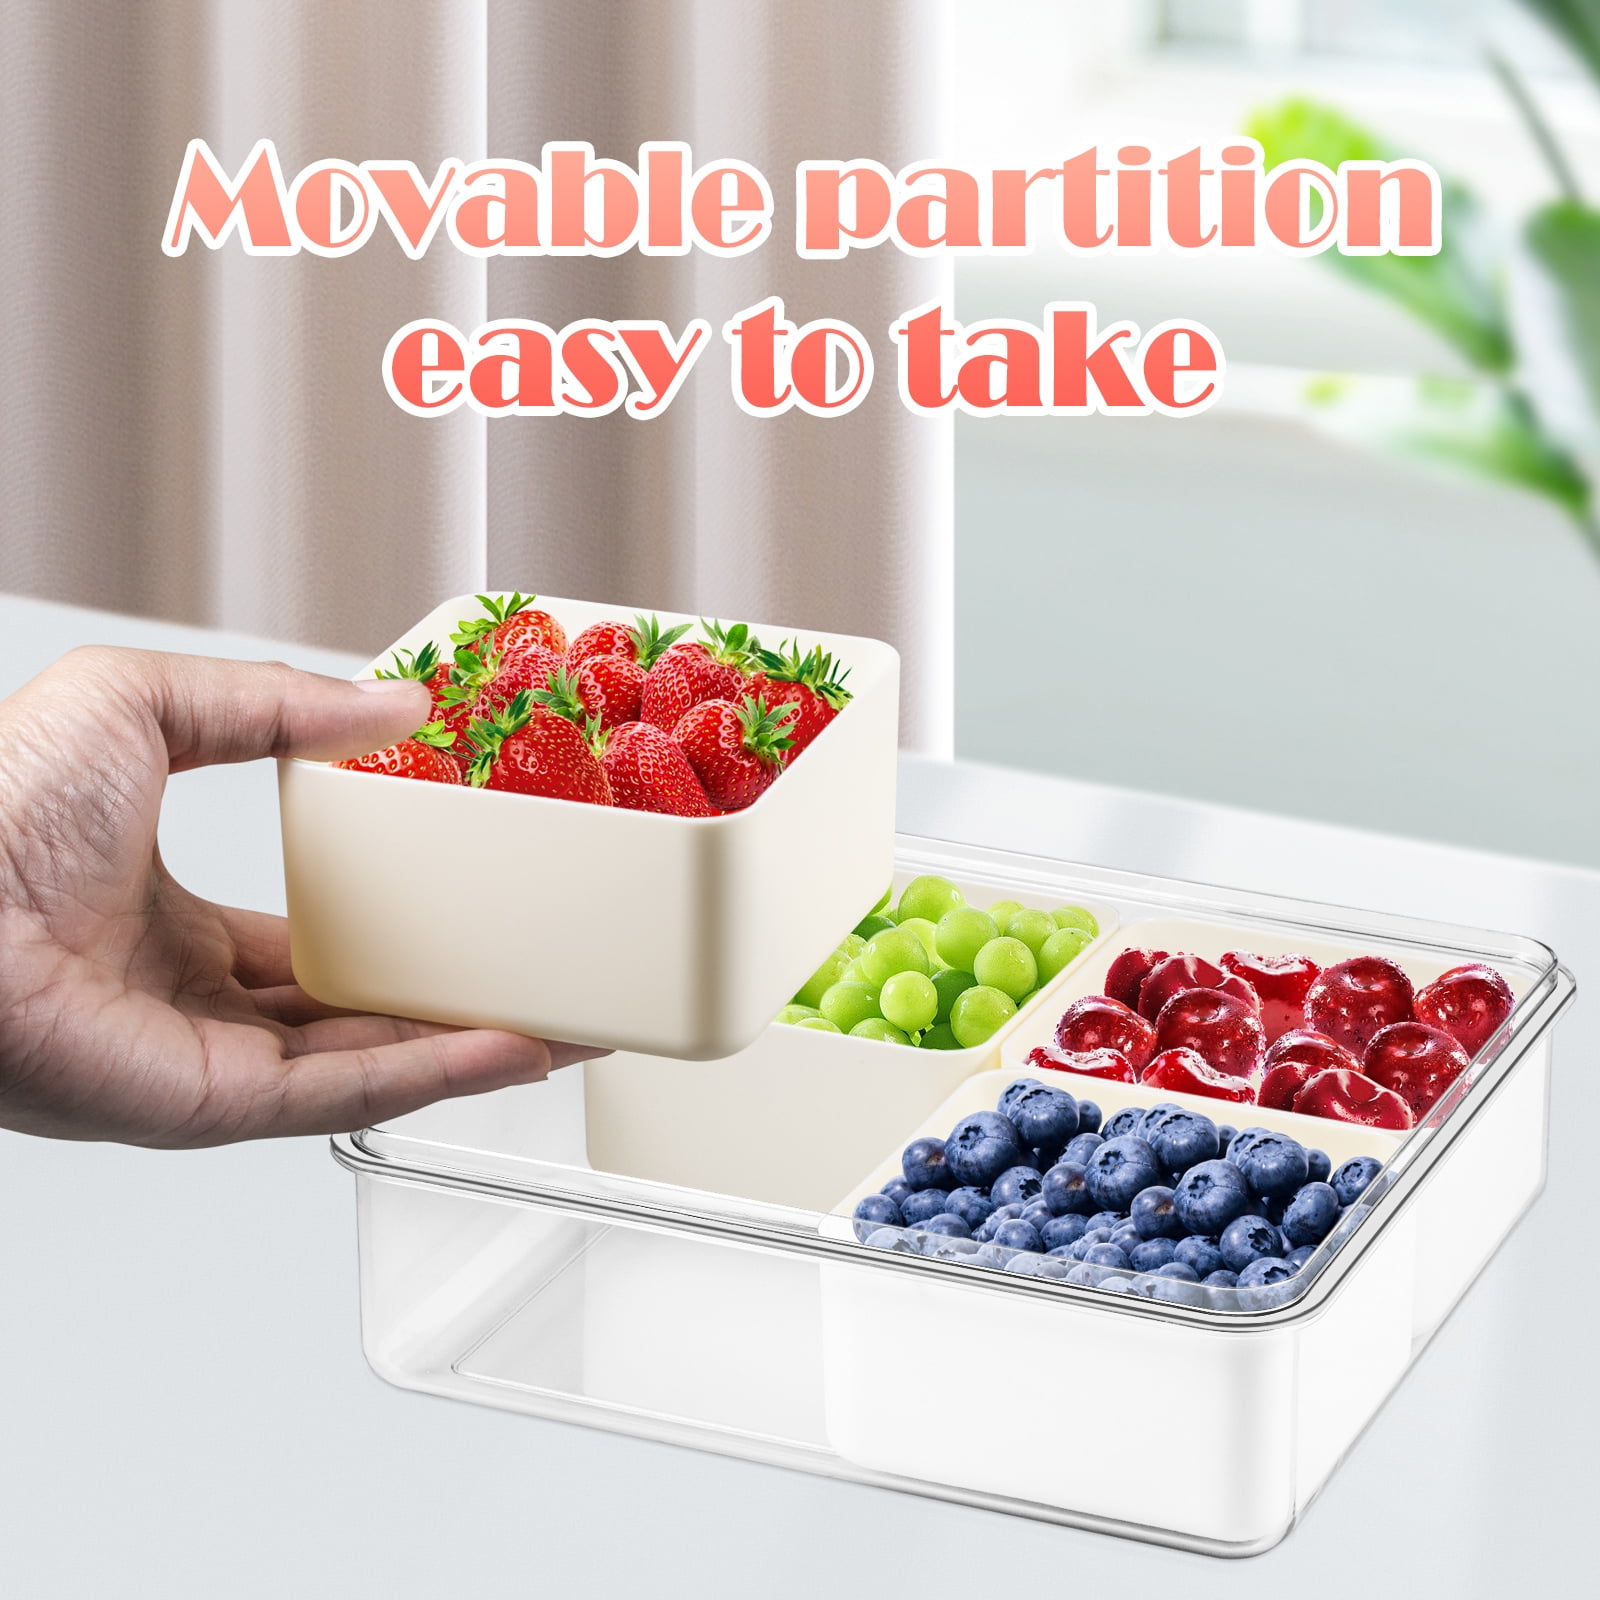 JLLOM 3 Pack Vegetable Fruit Storage Containers For Fridge With